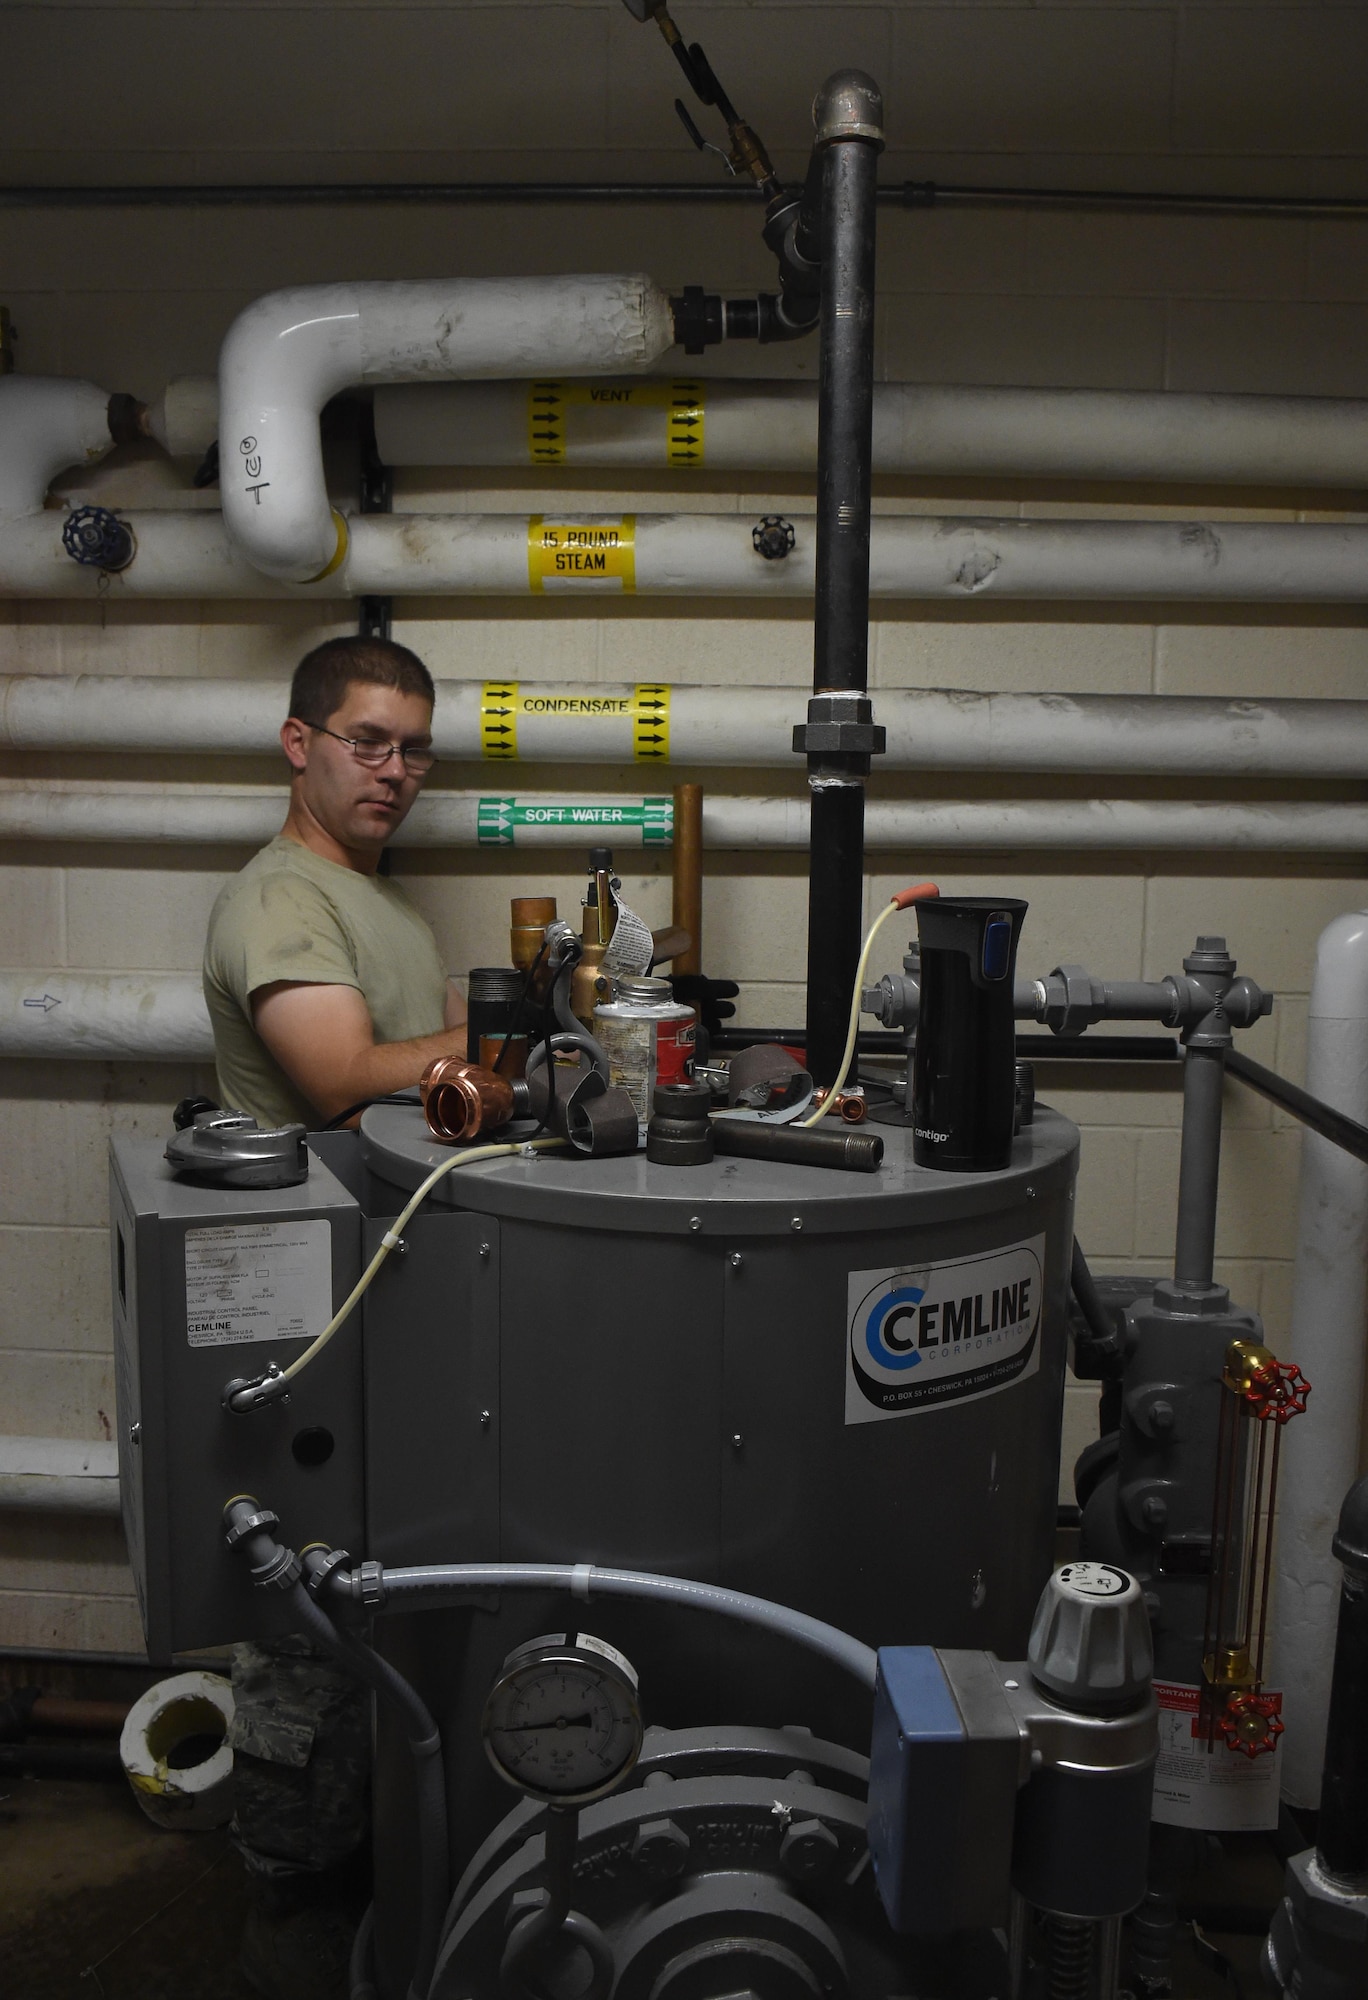 Airman Travis Yager, 446th Civil Engineer Squadron, installs a drain line for a boiler at Schriever Air Force Base, Colorado Thursday June 15, 2017. This was the first time Yager worked alongside the 50th Civil Engineer Squadron. (U.S. Air Force photo/Senior Airman Arielle Vasquez)